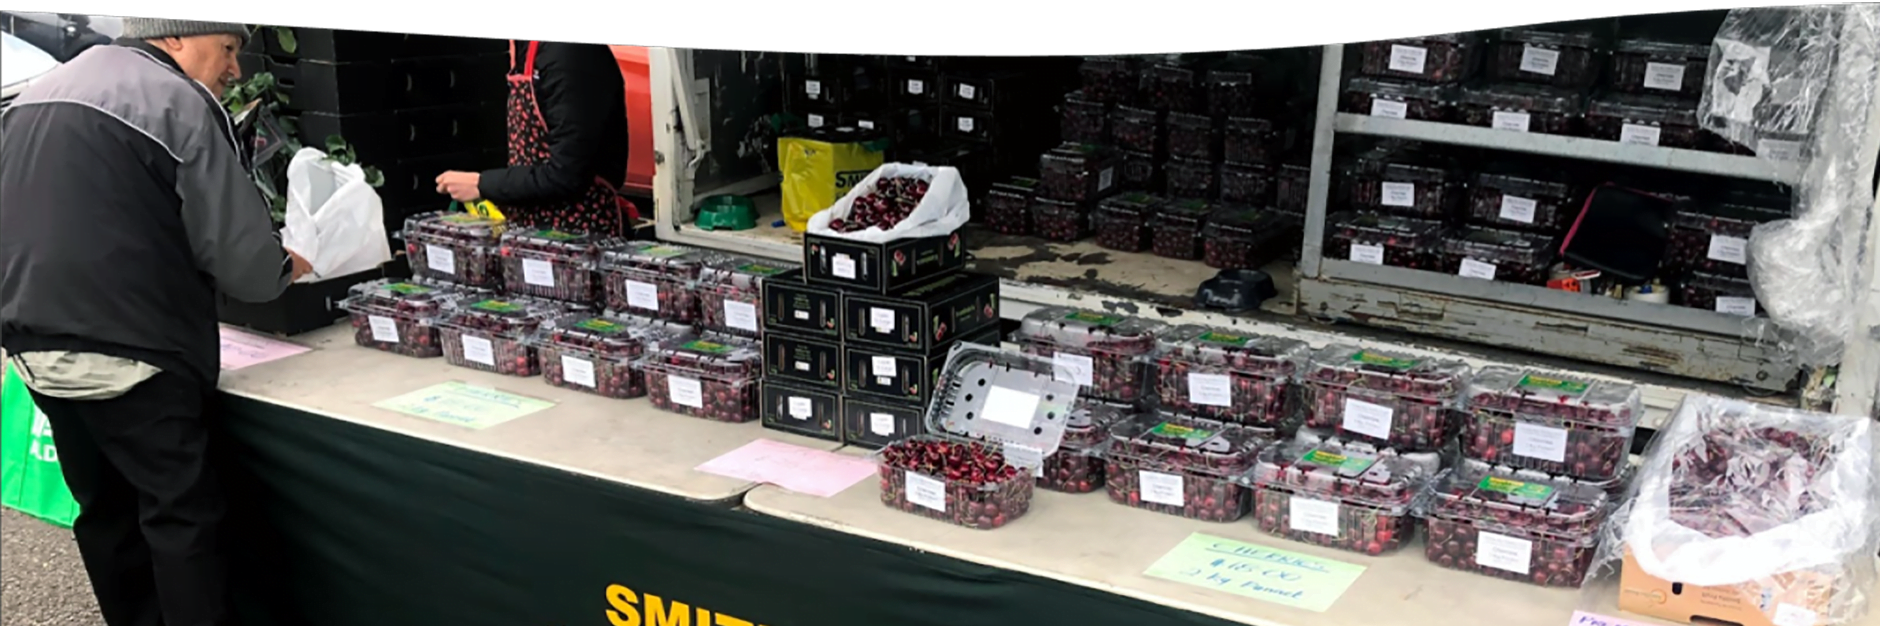 smiths fruit cherry stall at a market